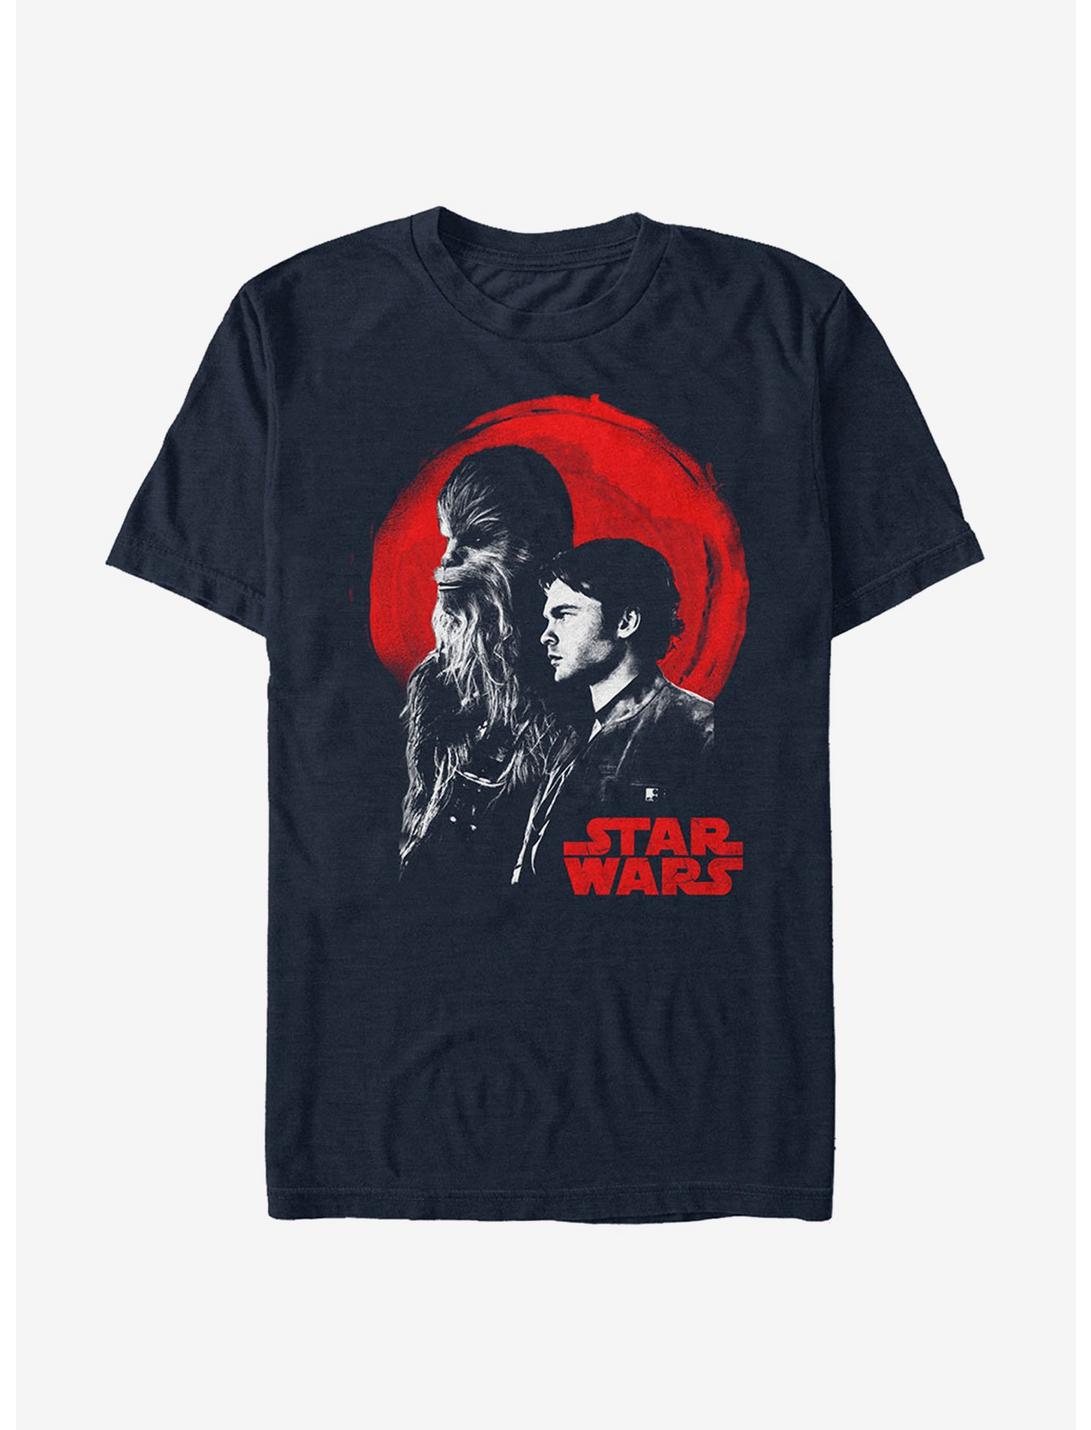 Star Wars Partners in Crime Sunset T-Shirt, NAVY, hi-res